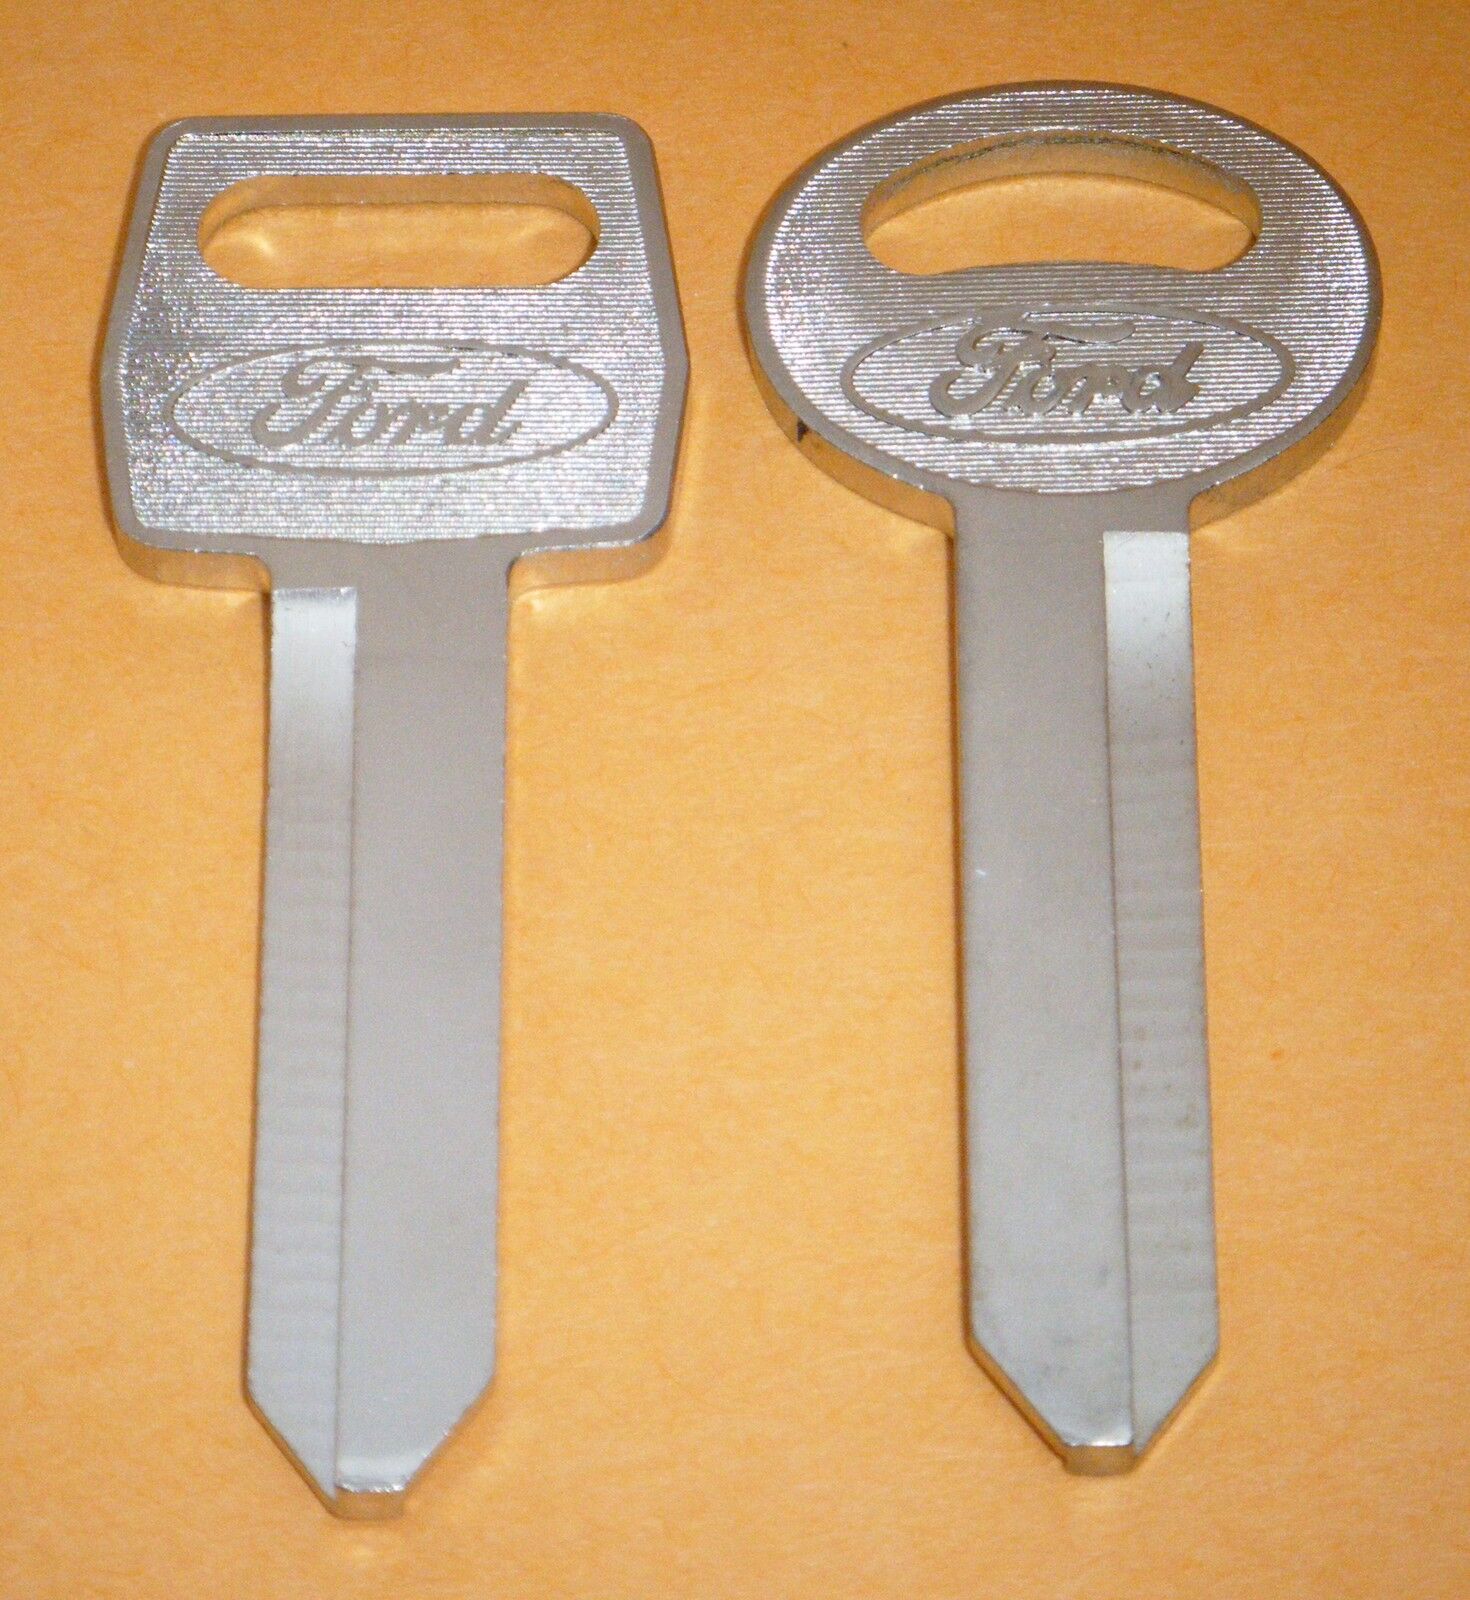 VINTAGE FORD MACH 1 SHELBY MUSTANG KEY BLANKS 1968 1969 1970 1971 - 1973